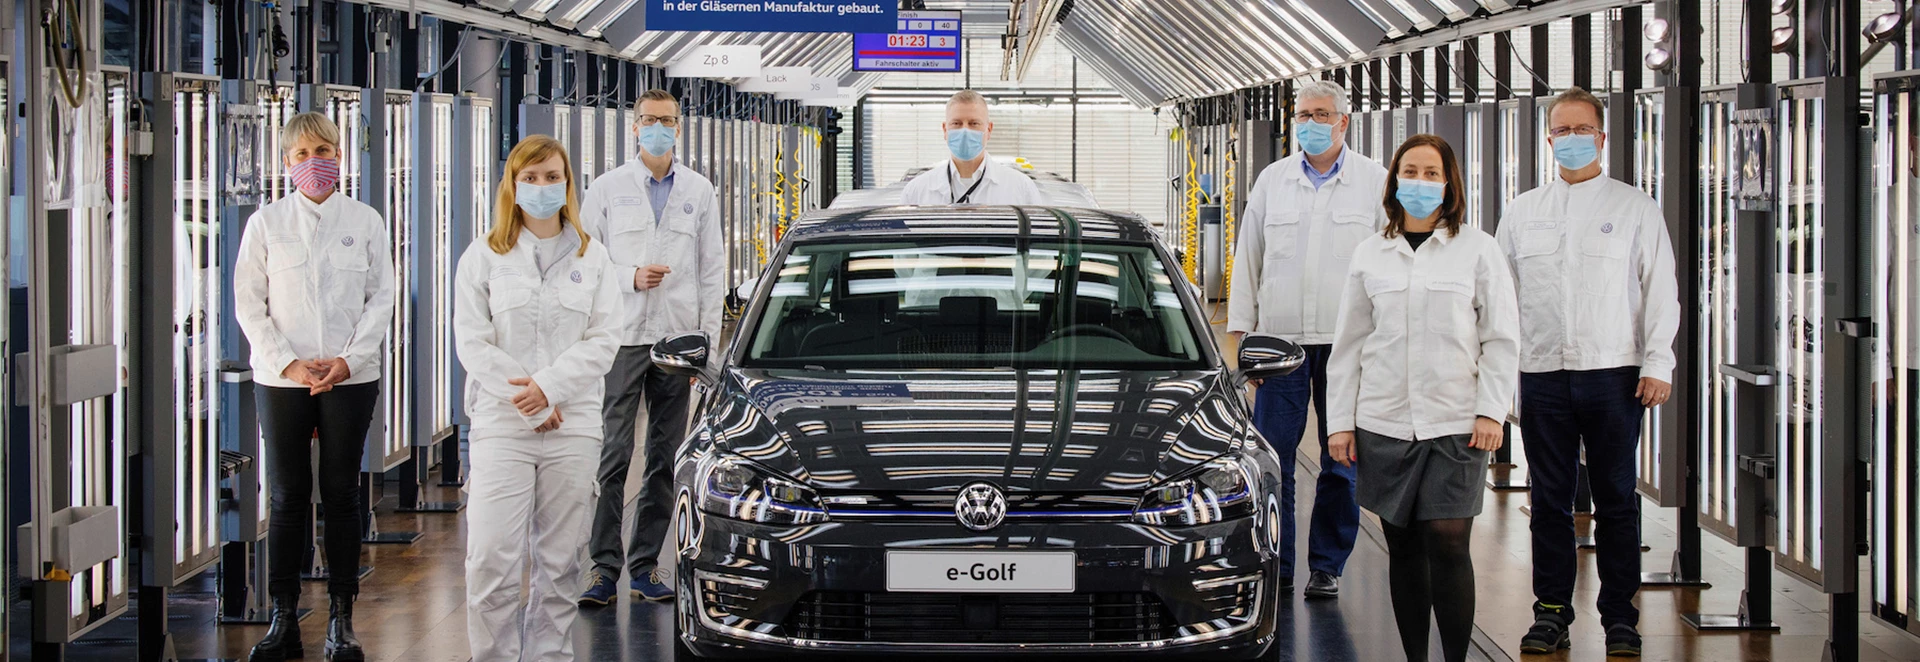 Final Volkswagen e-Golf rolls off production line as firm ramps up ID.3 